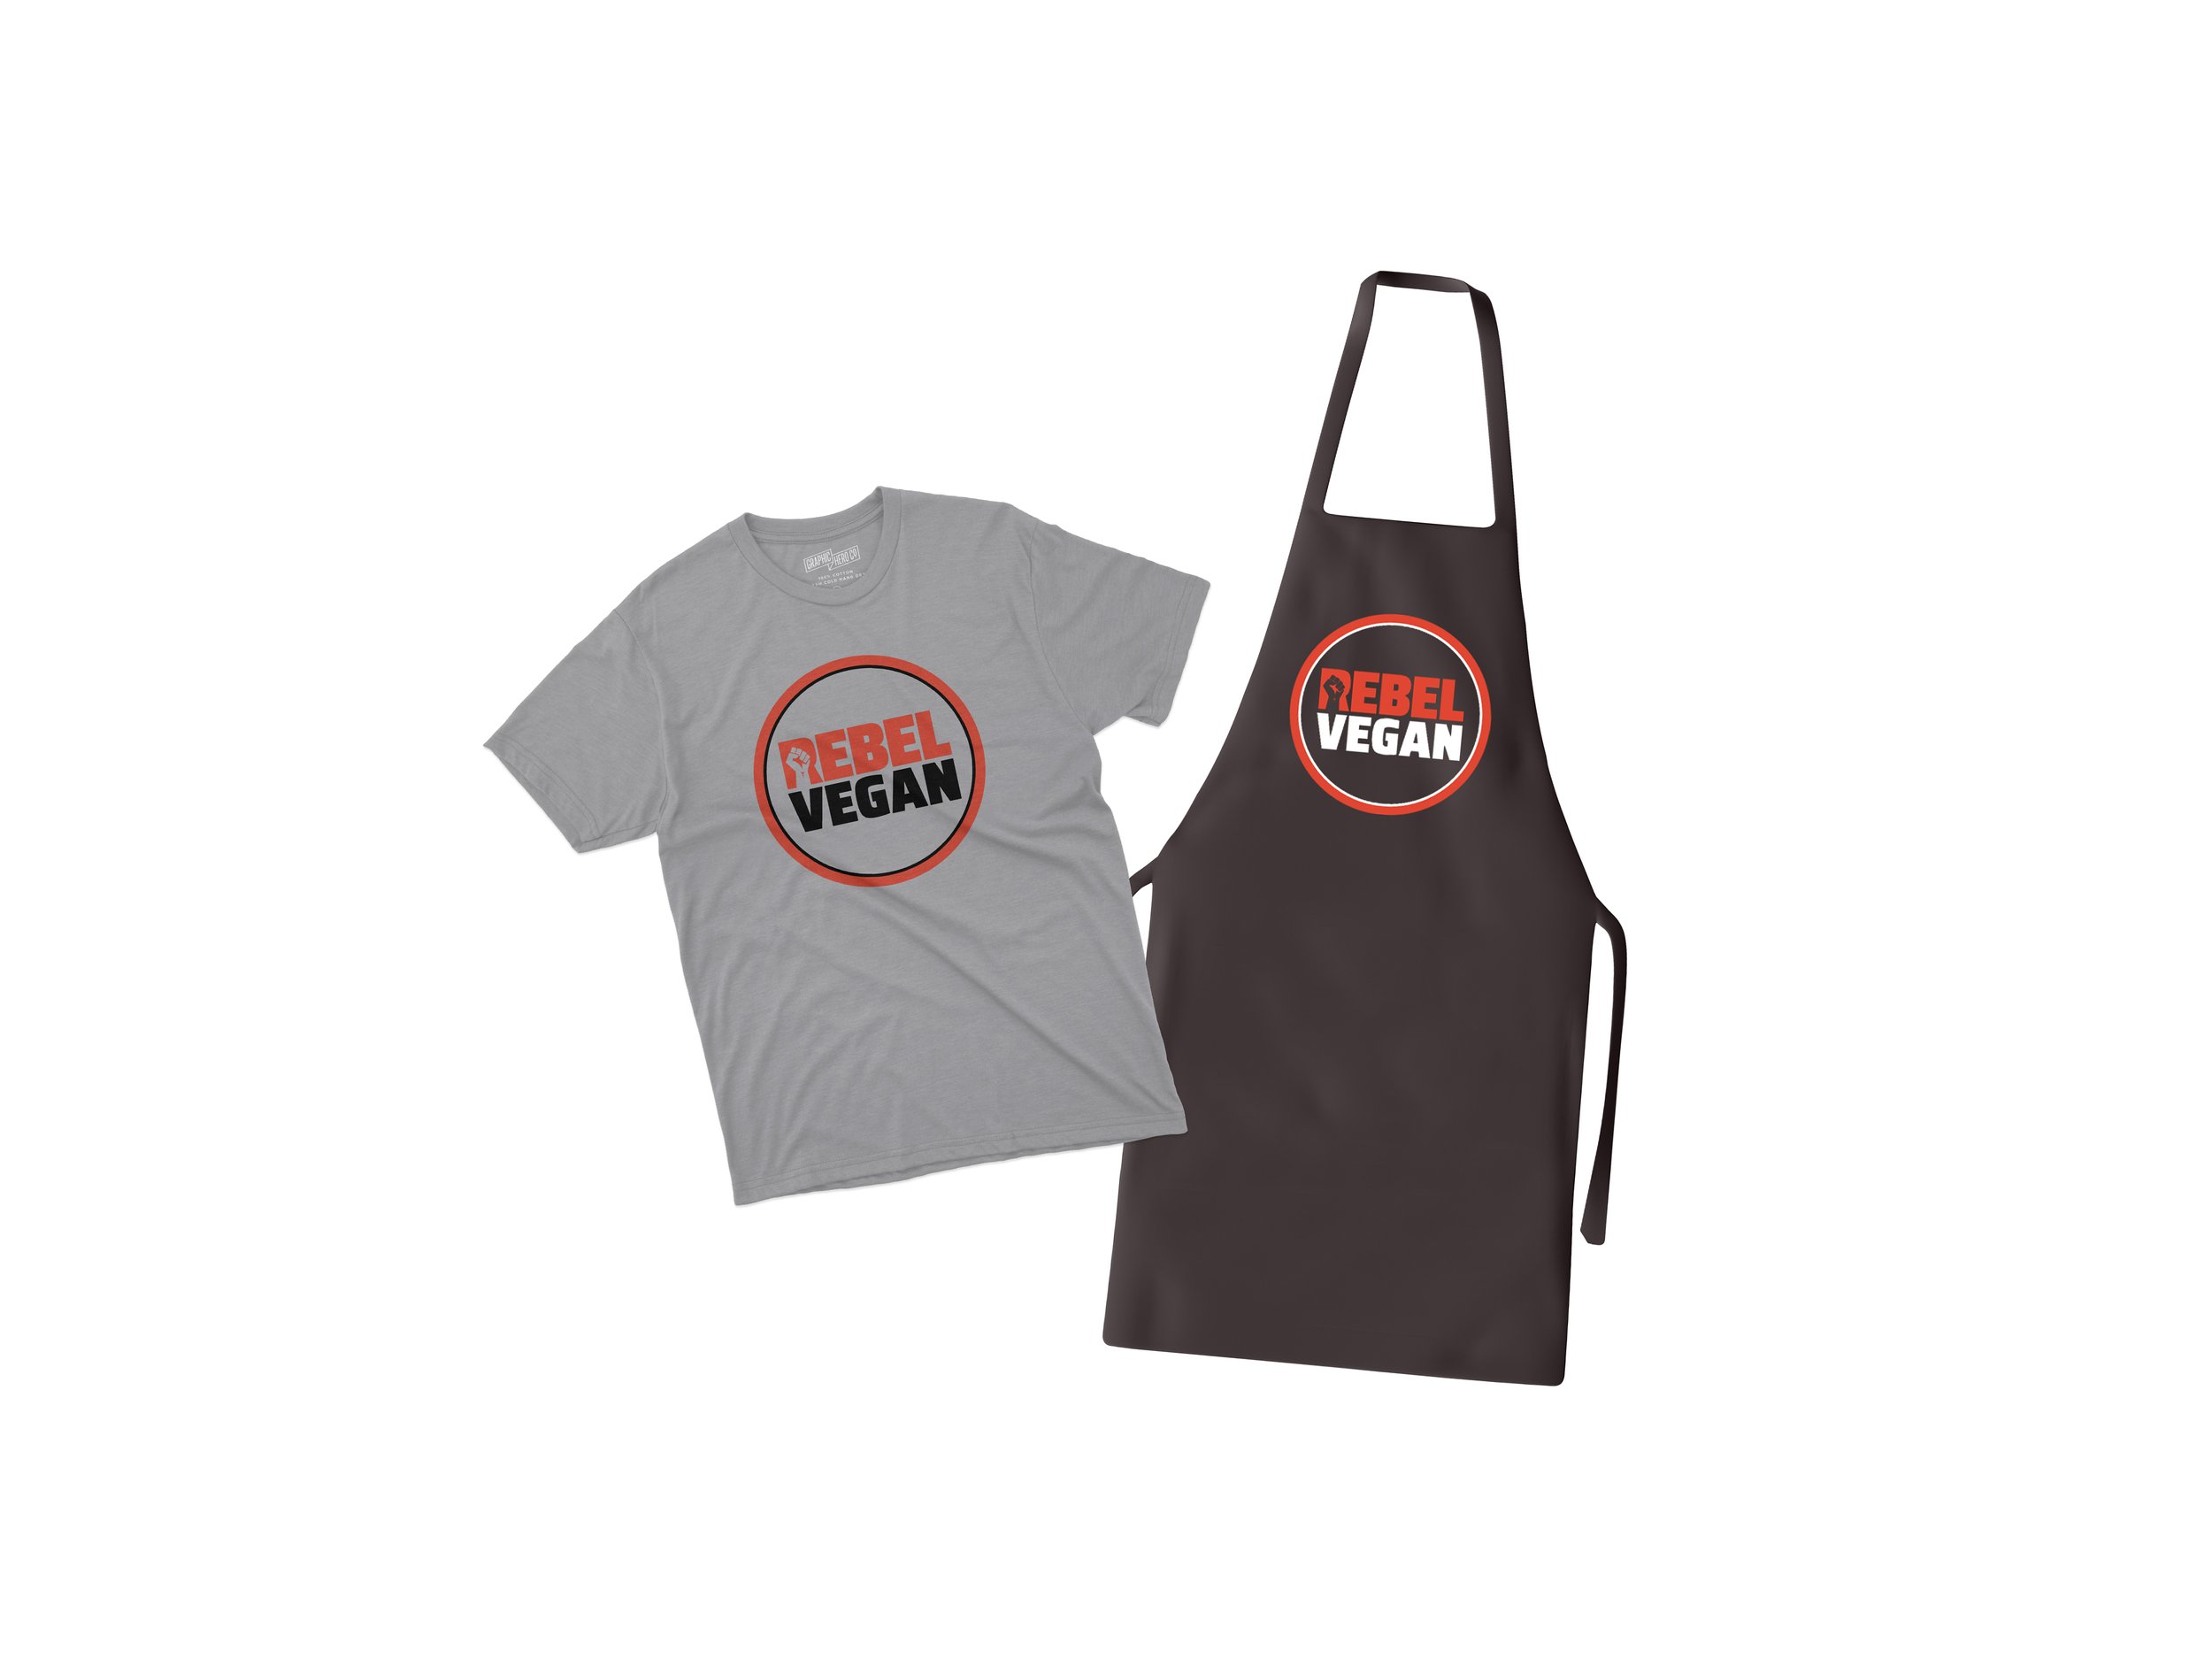 T-shirt and Apron combo